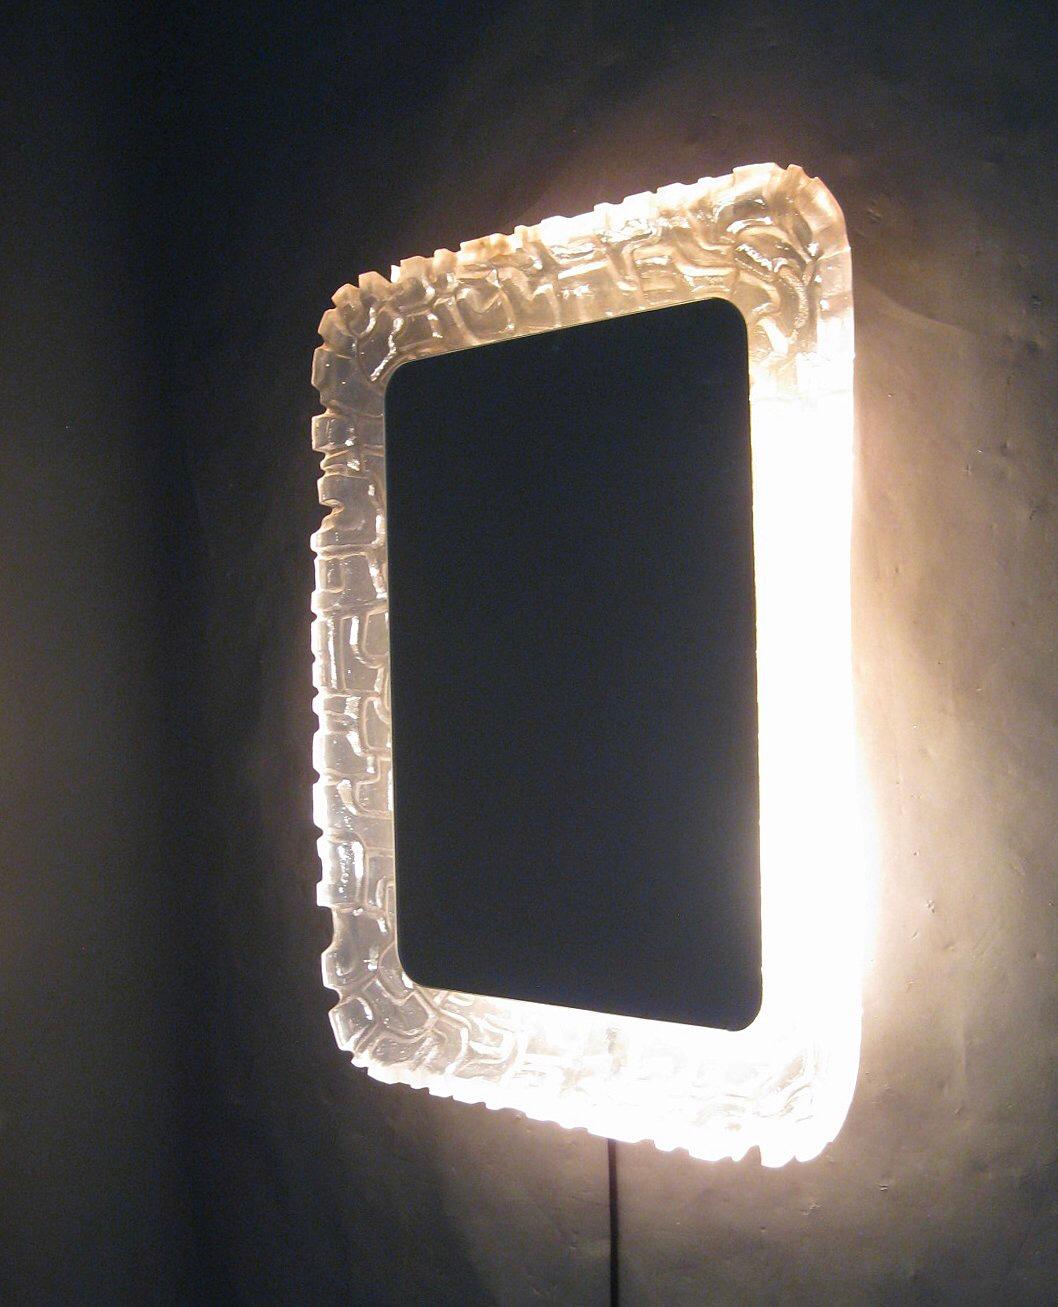 Large illuminated mirror made by Erco Lucite in 1960-1970. Backlight and textured Lucite frame, shaped to resemble ice glass.
 